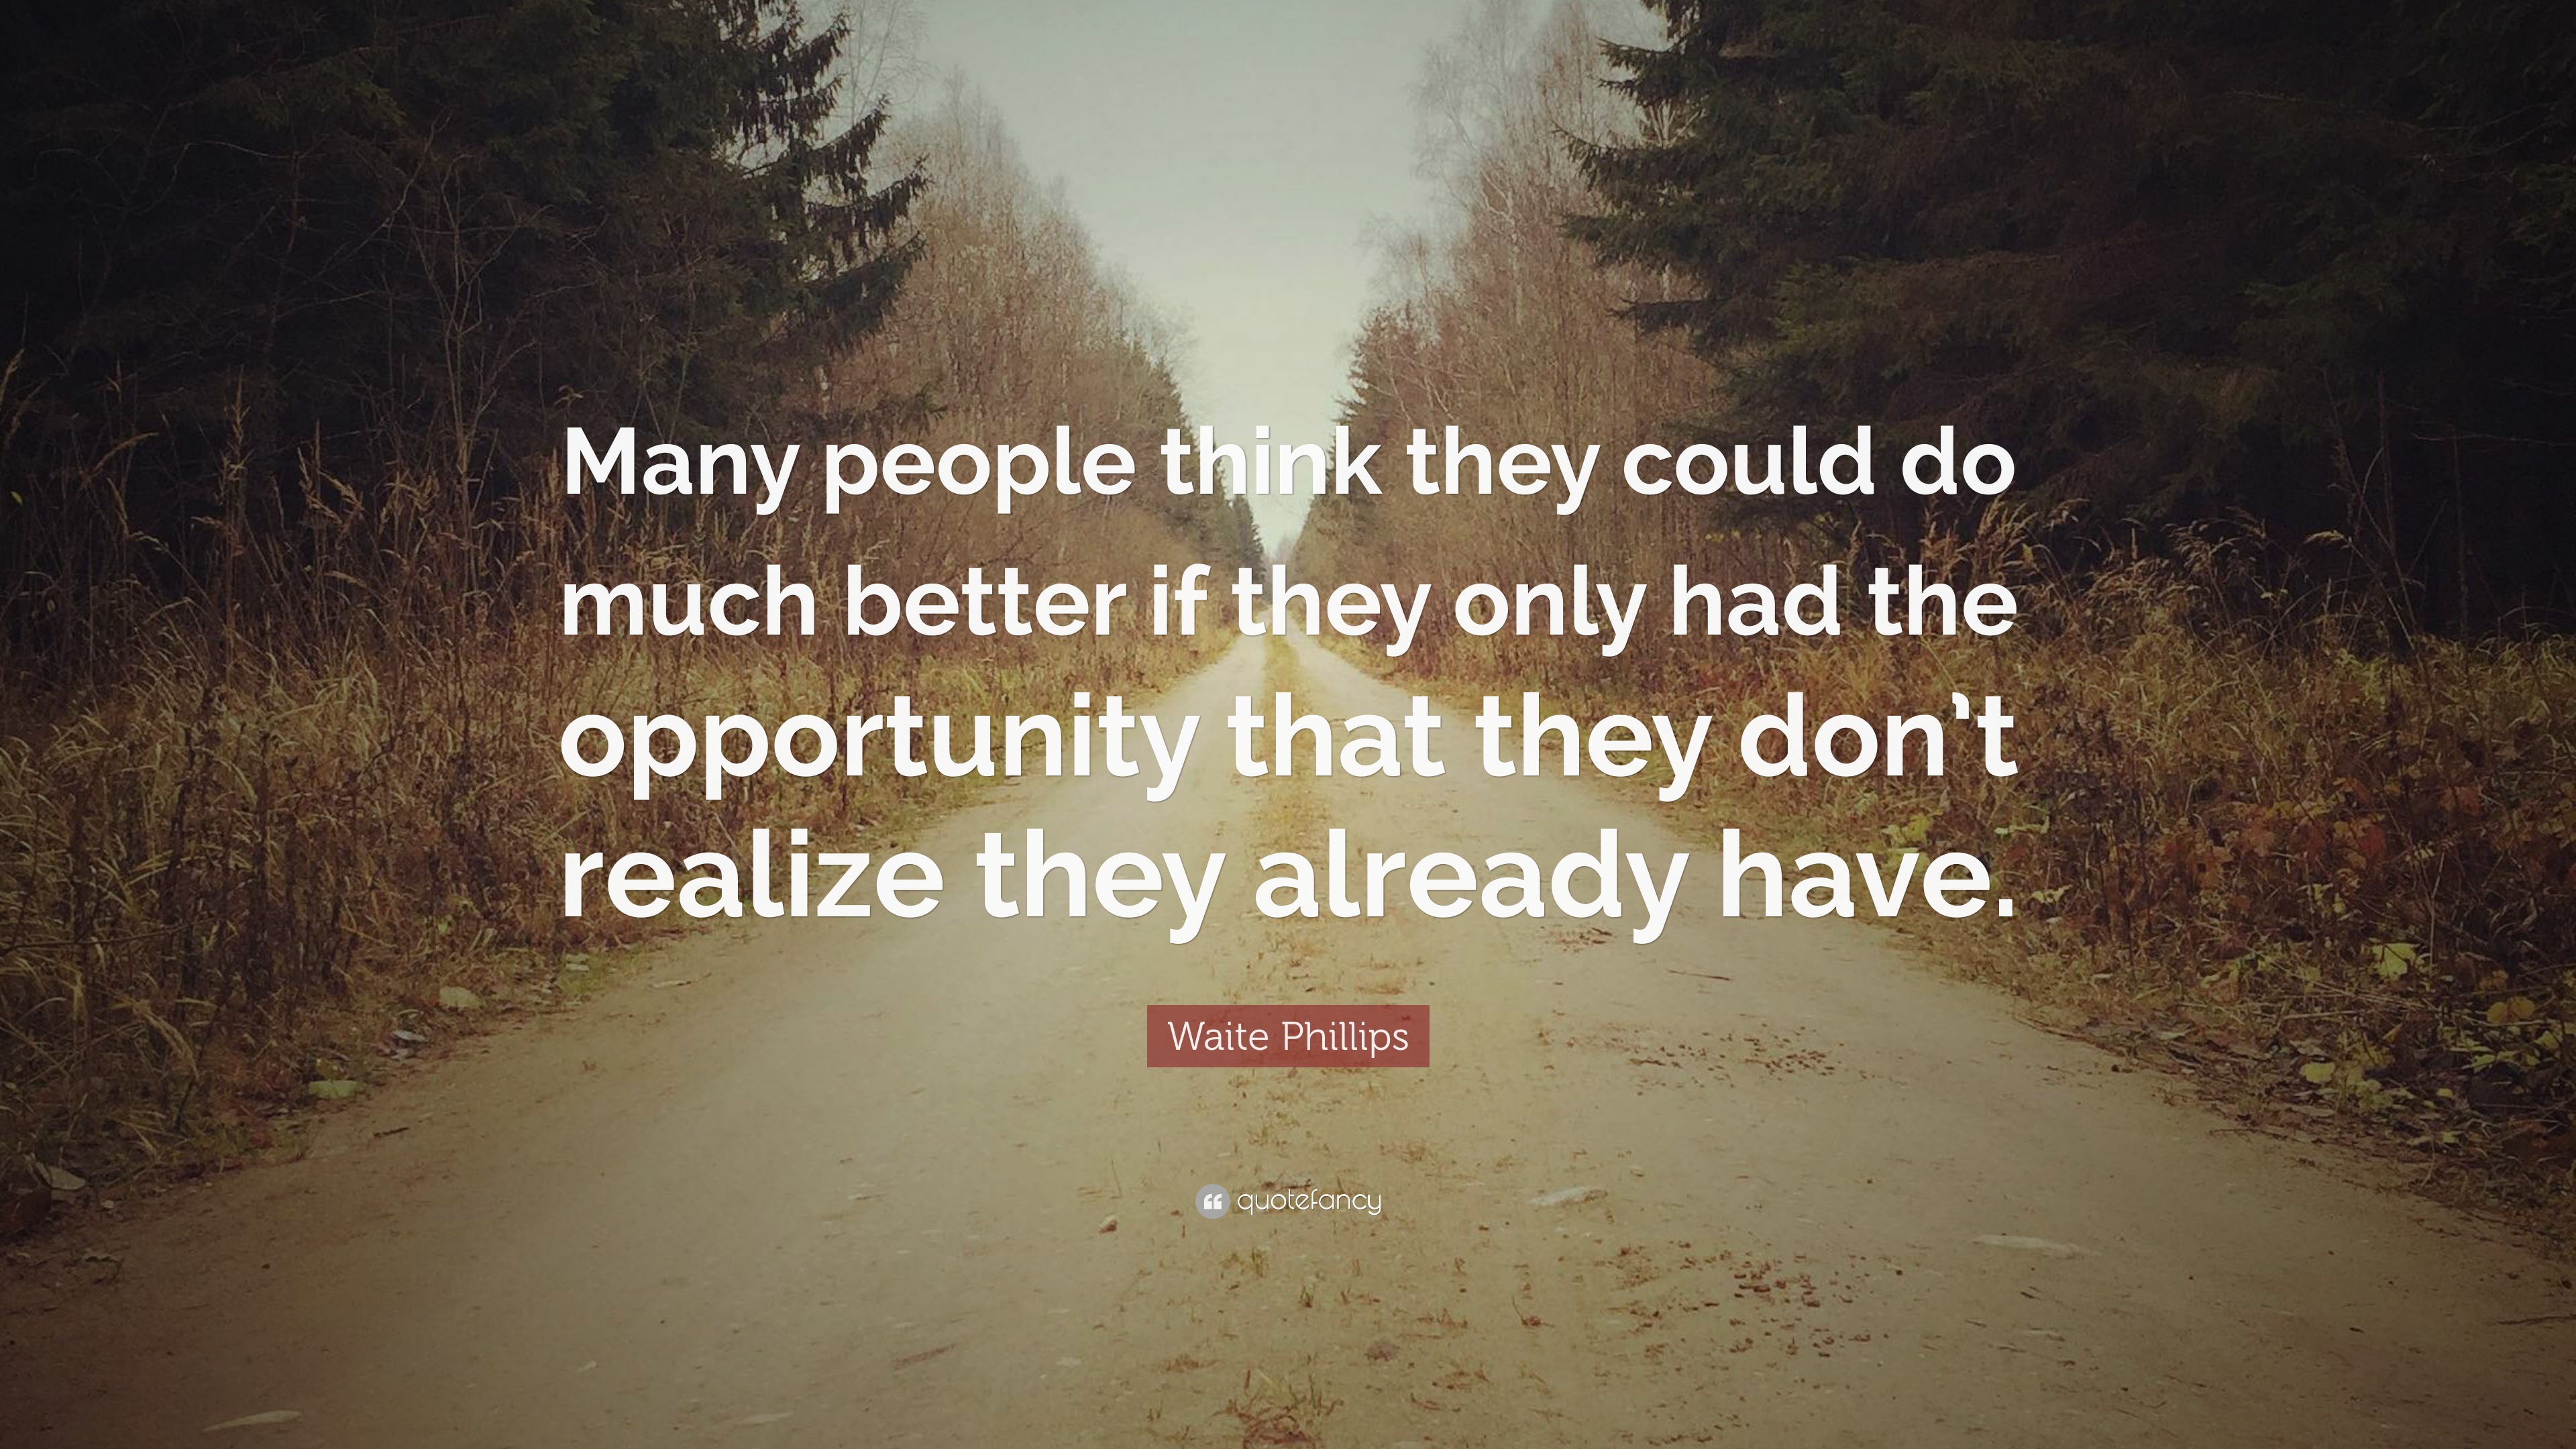 Waite Phillips Quote: “Many people think they could do much better if ...